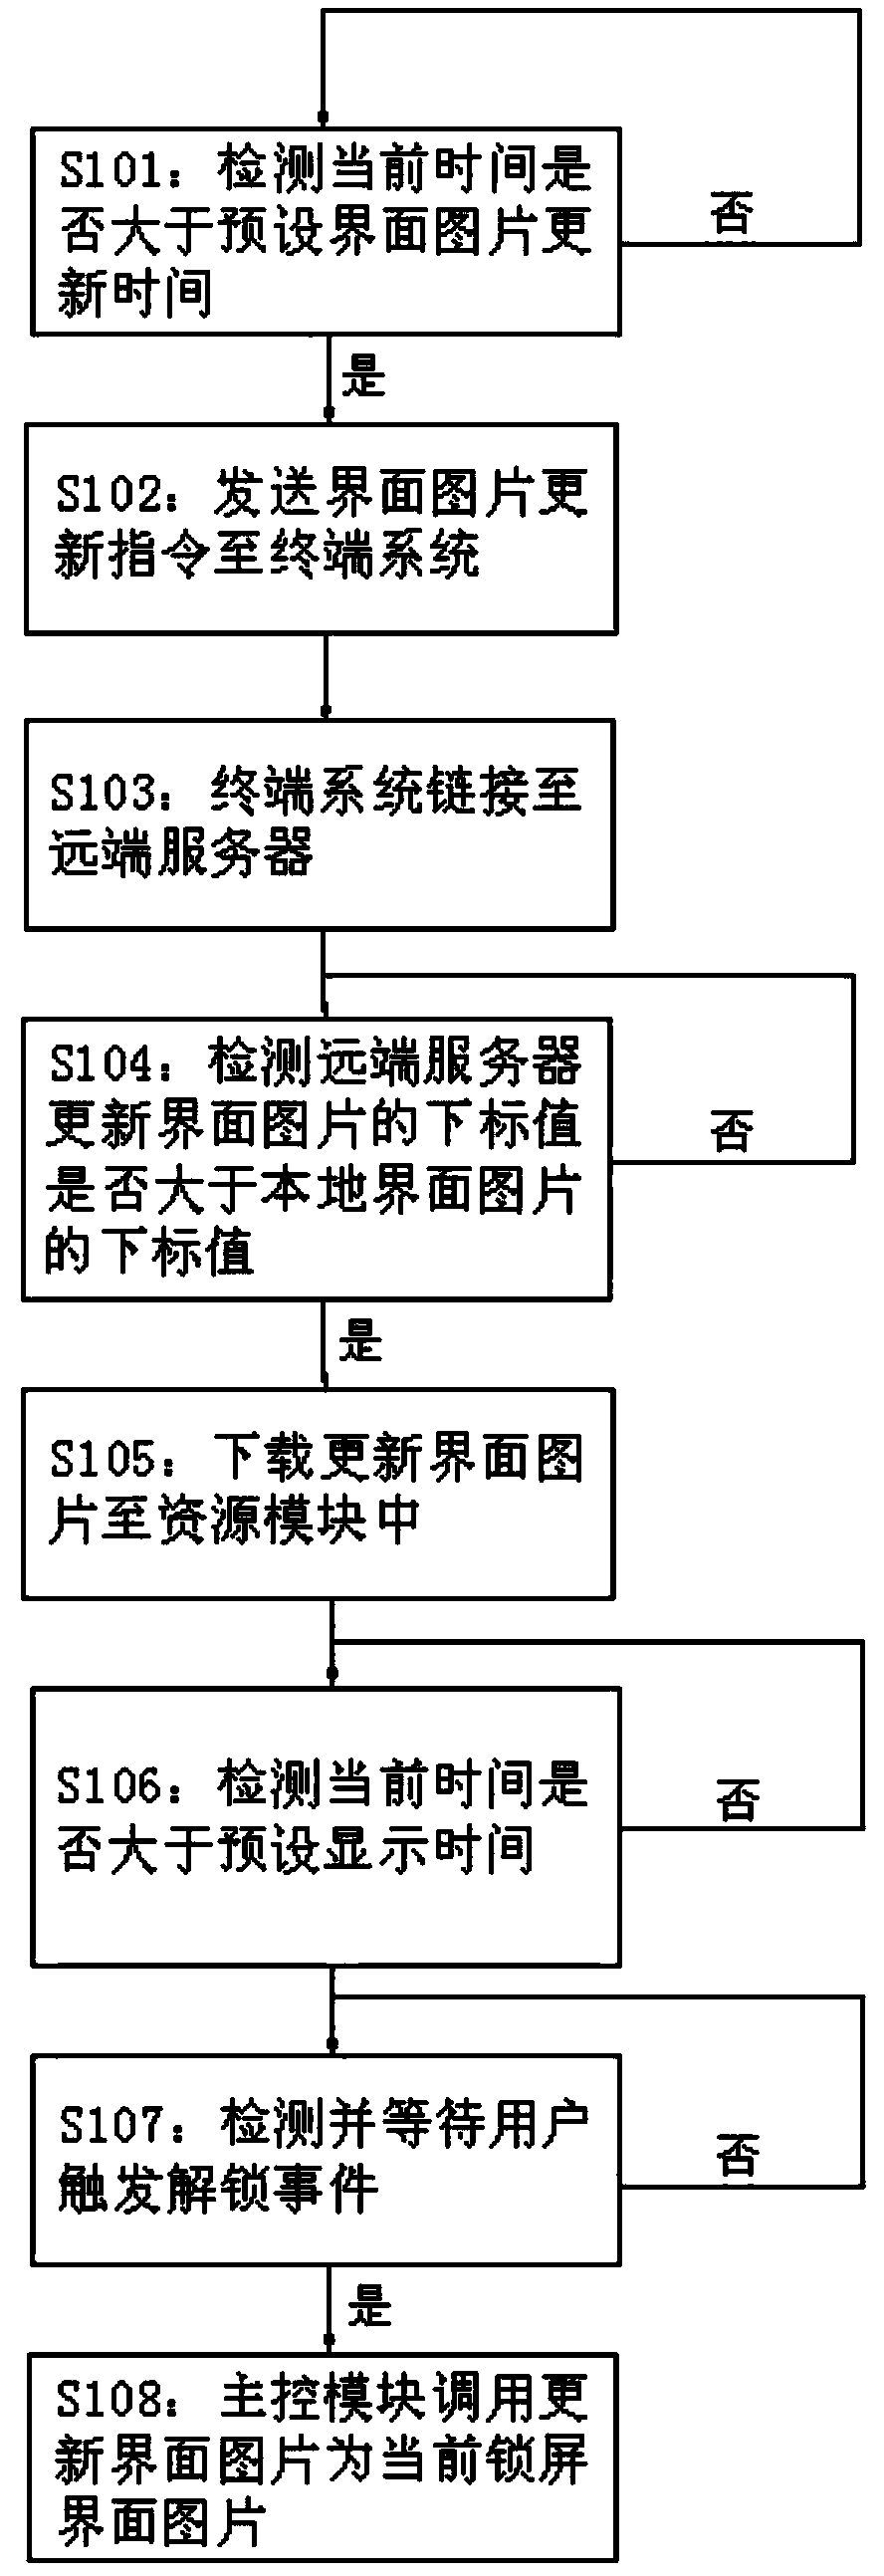 Screen locking system with screen locking theme interface updated and shared in real time and implementation method